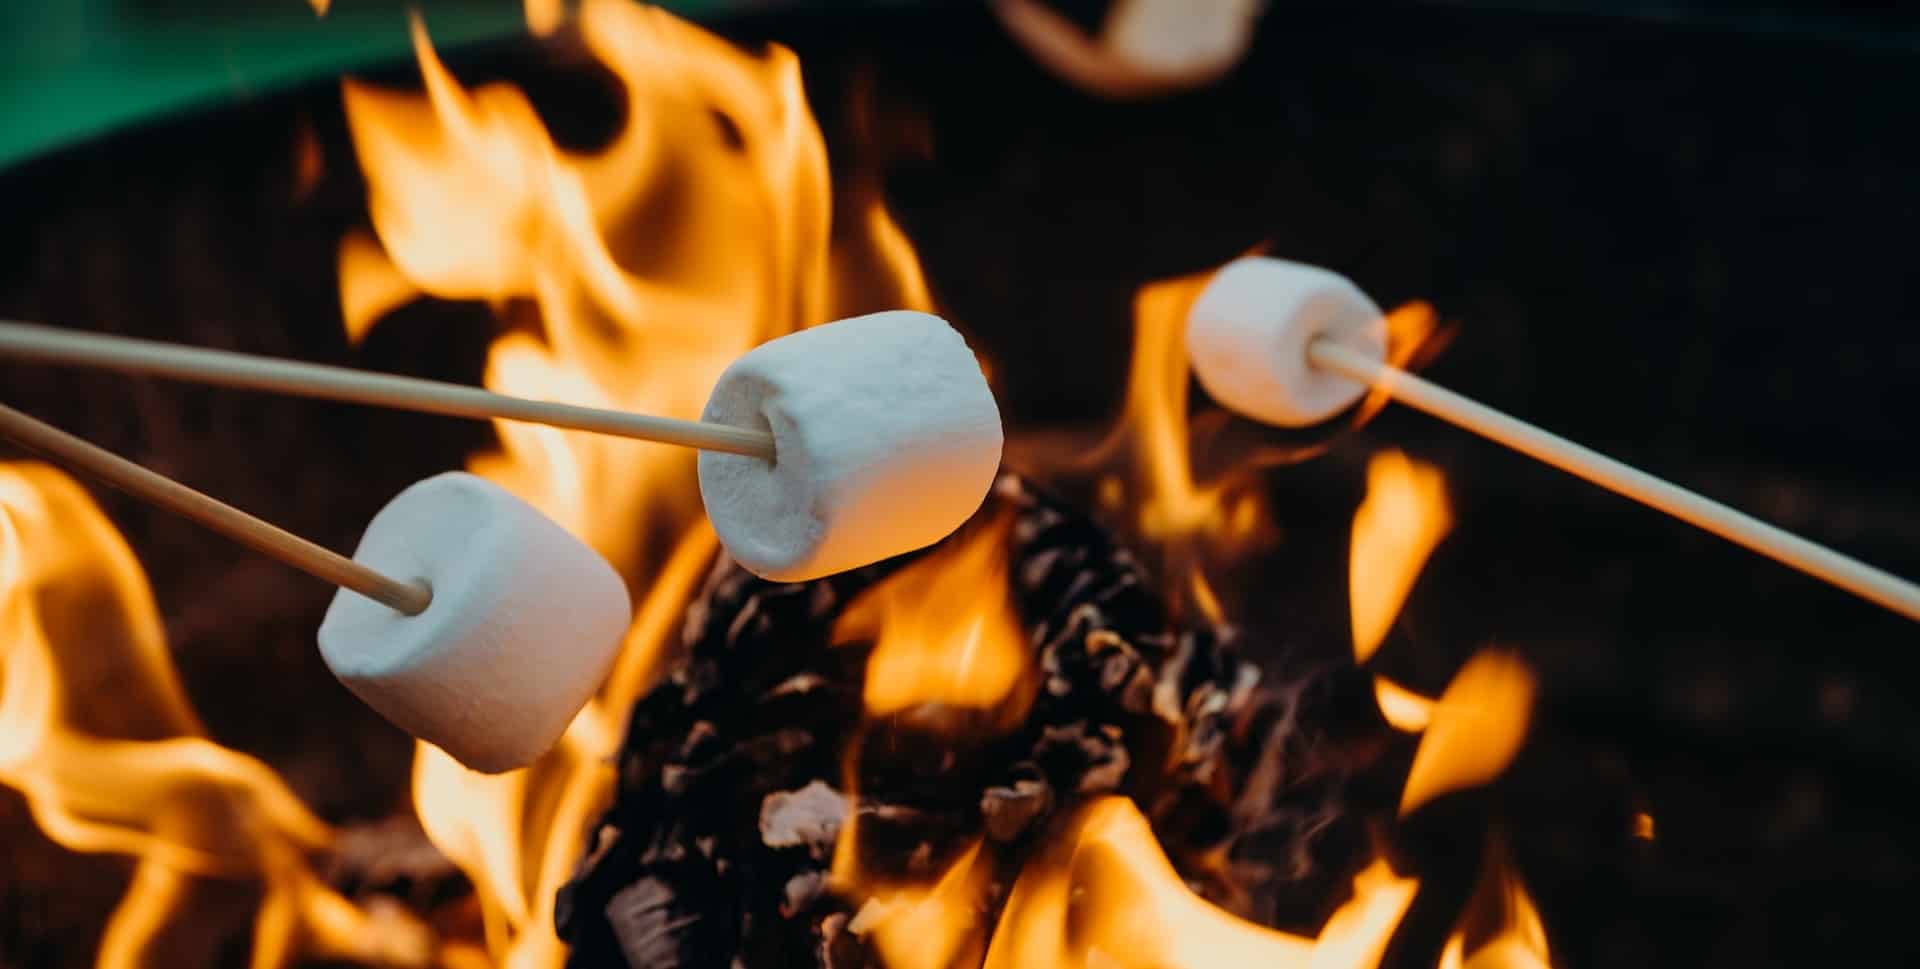 Three smores about to be cooked on sticks over a campfire.